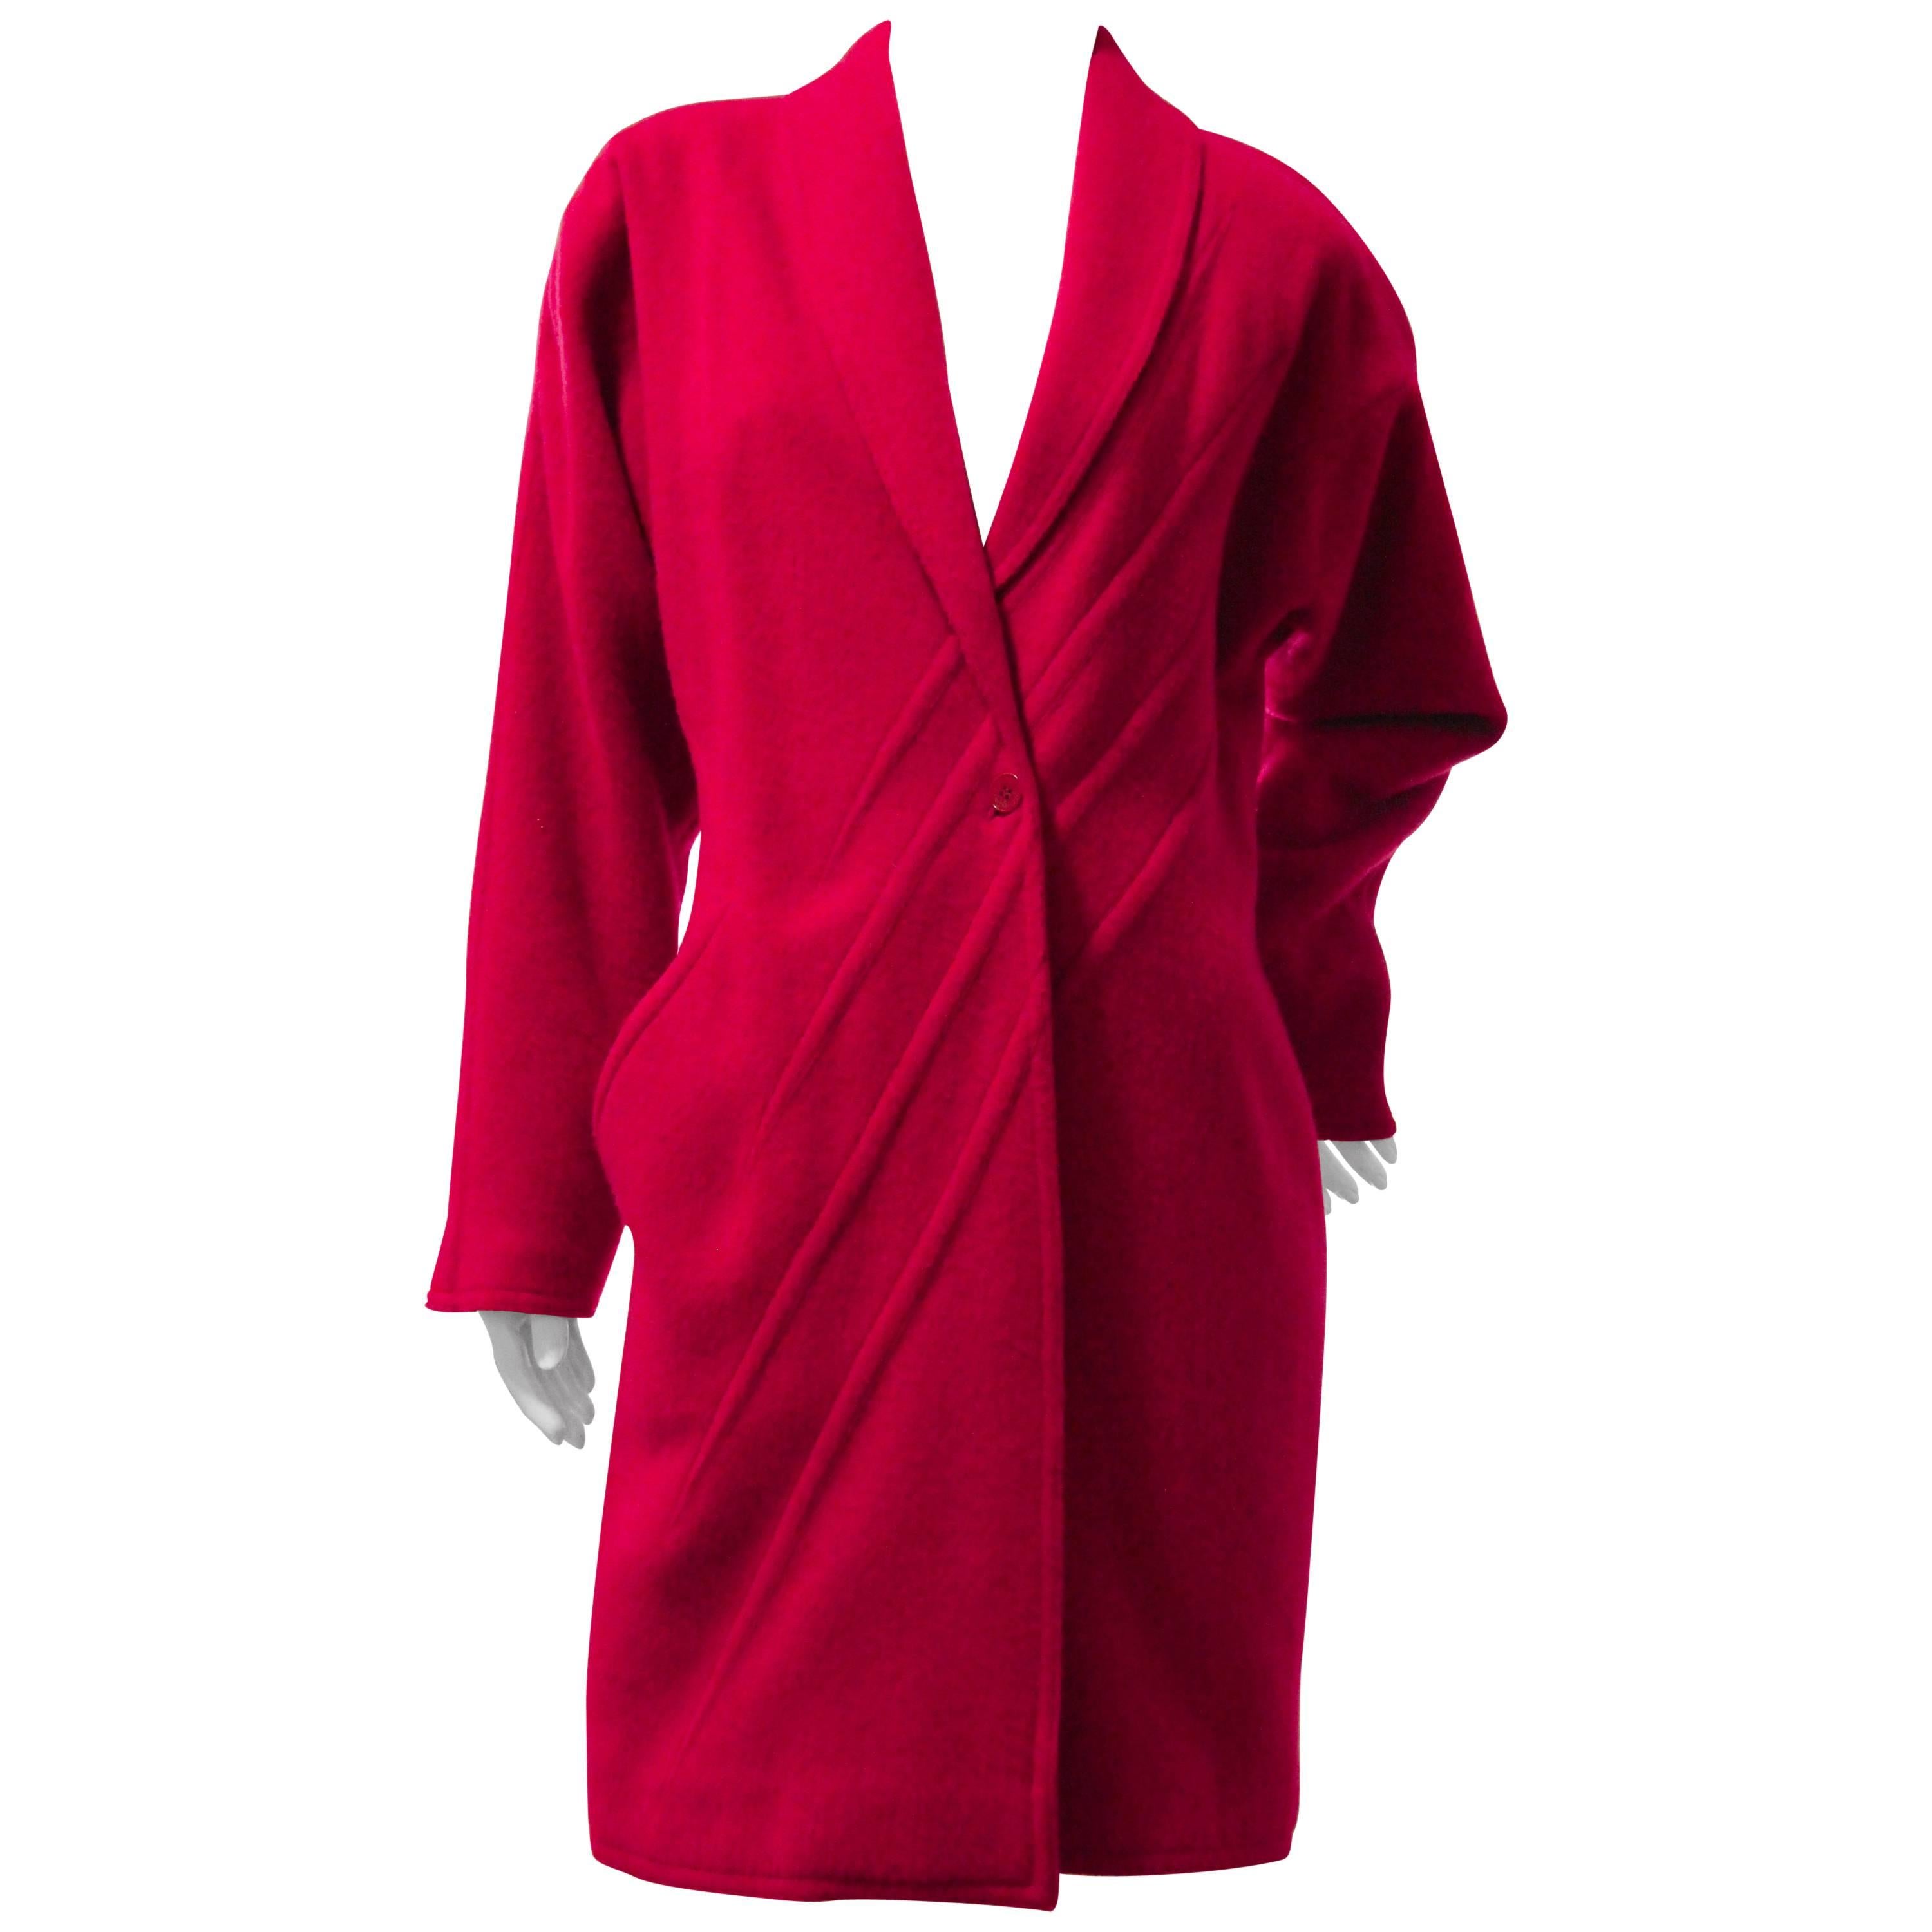 1980s Gianni Versace Primary Red Wool Coat w Angular Trapunto Stitching Details For Sale